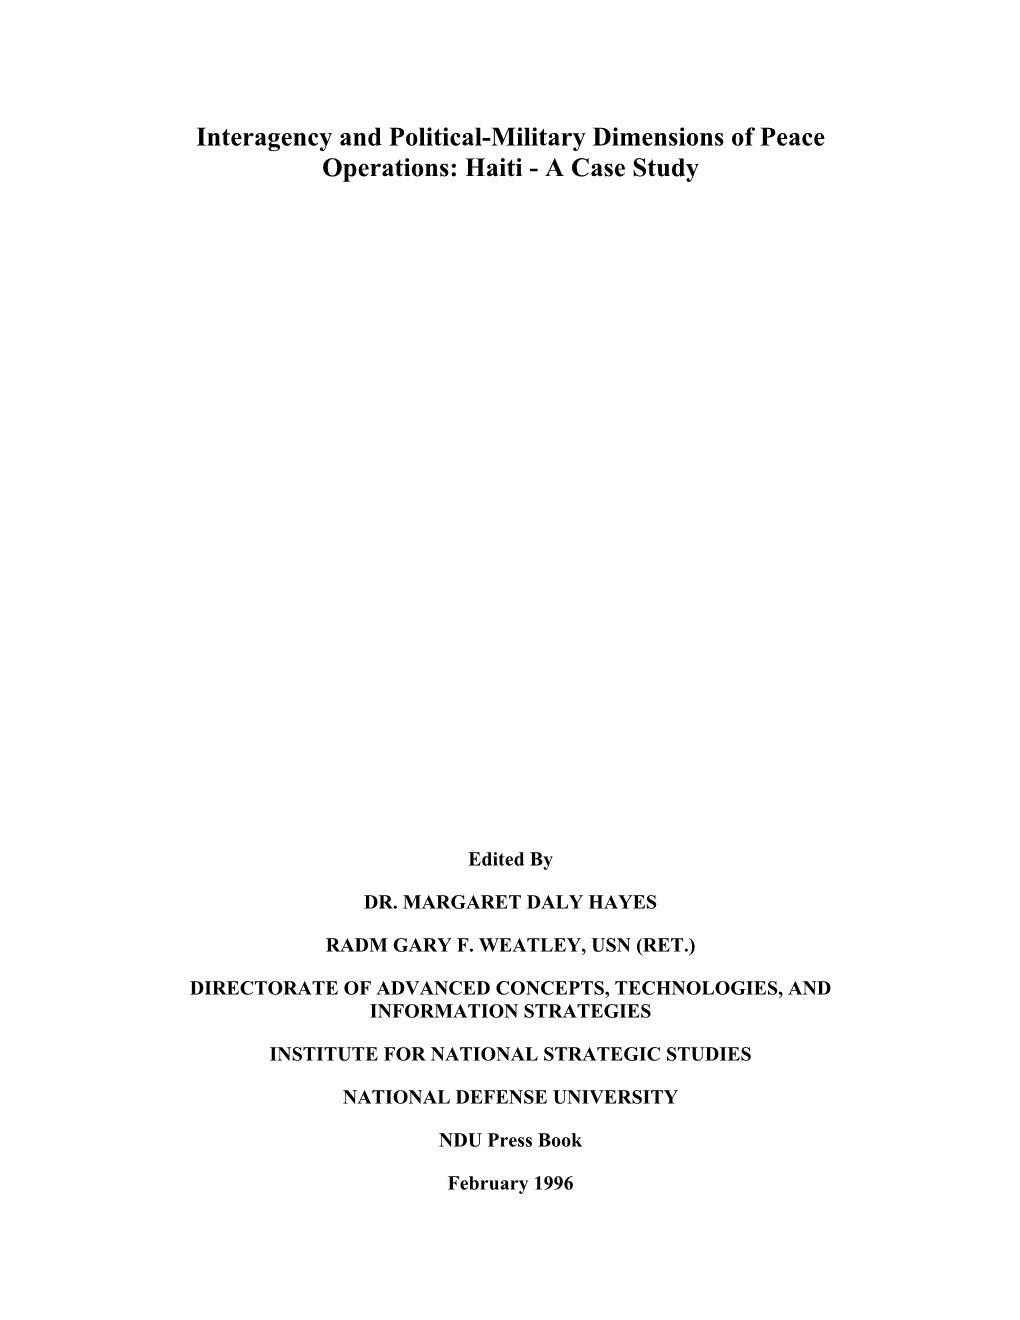 Interagency and Political-Military Dimensions of Peace Operations: Haiti - a Case Study